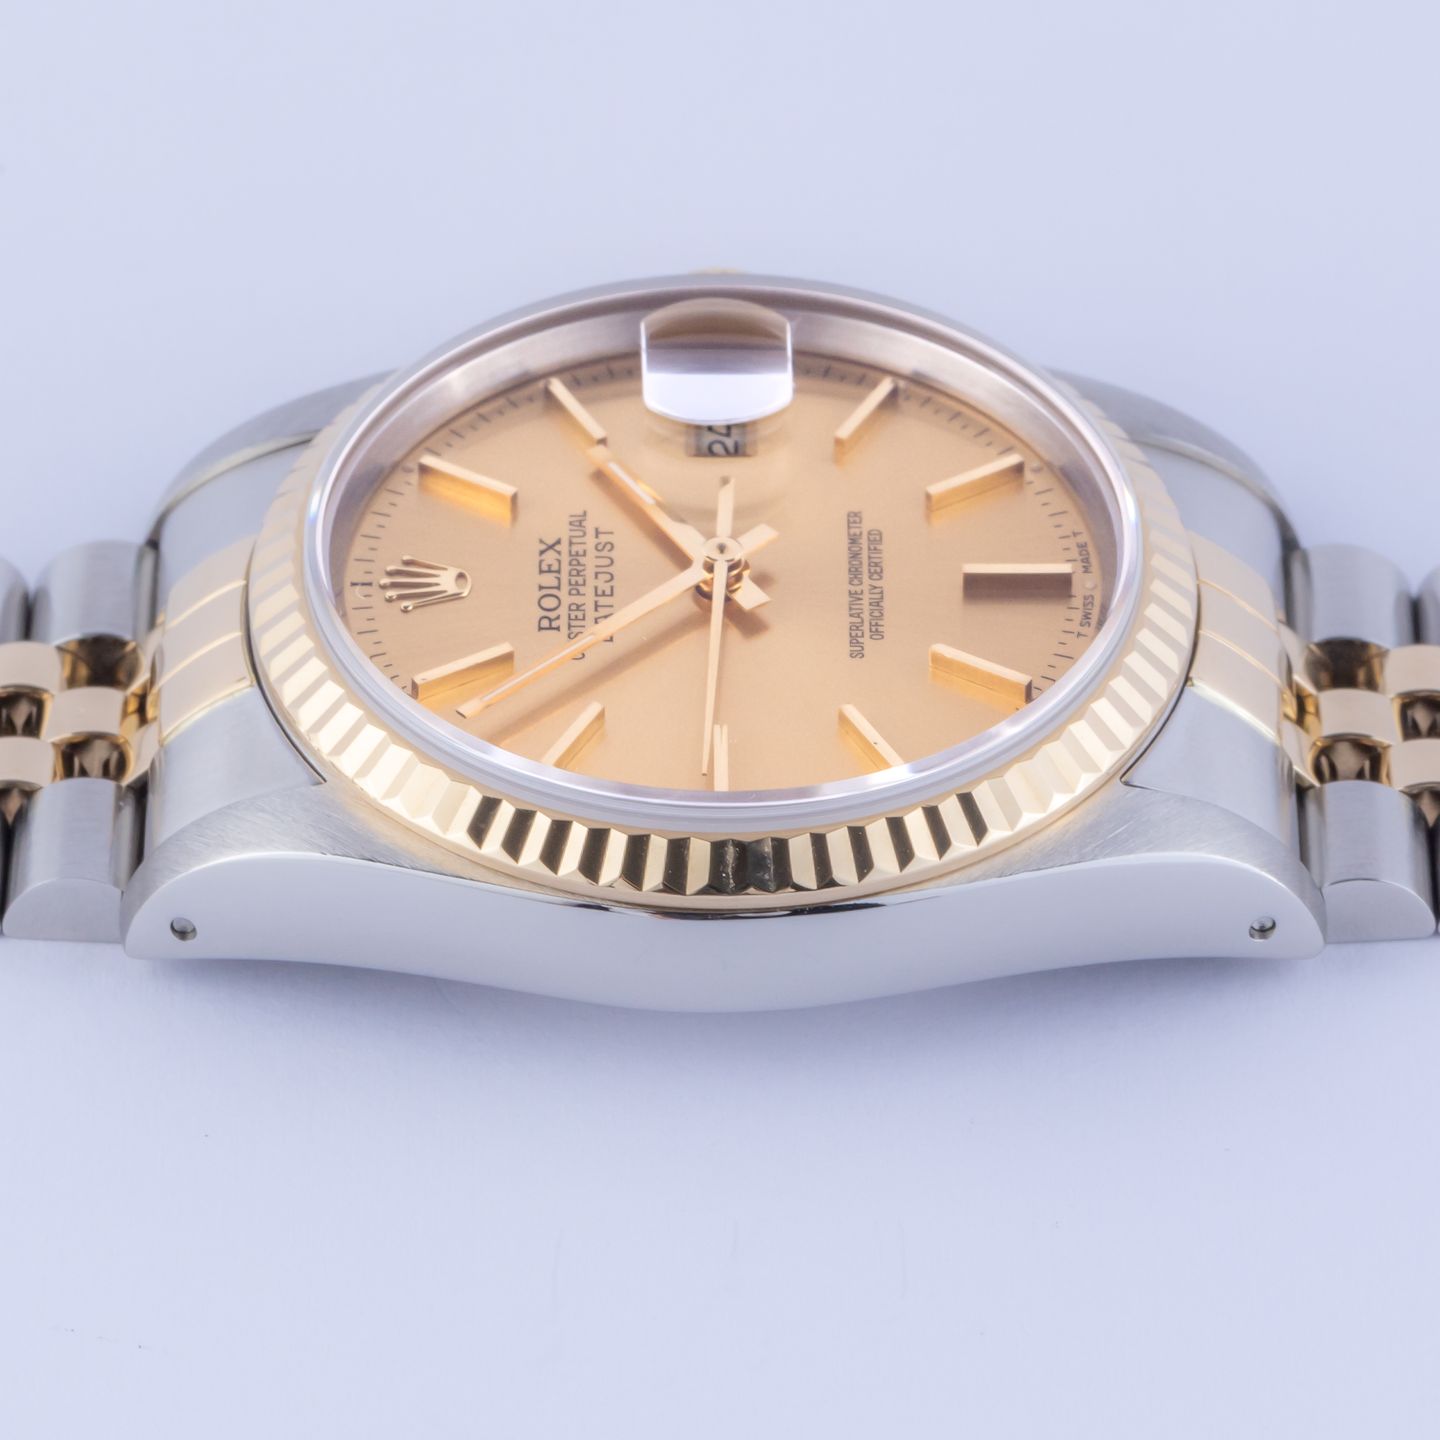 Rolex Datejust 36 16233 (1993) - Champagne dial 36 mm Gold/Steel case (6/8)